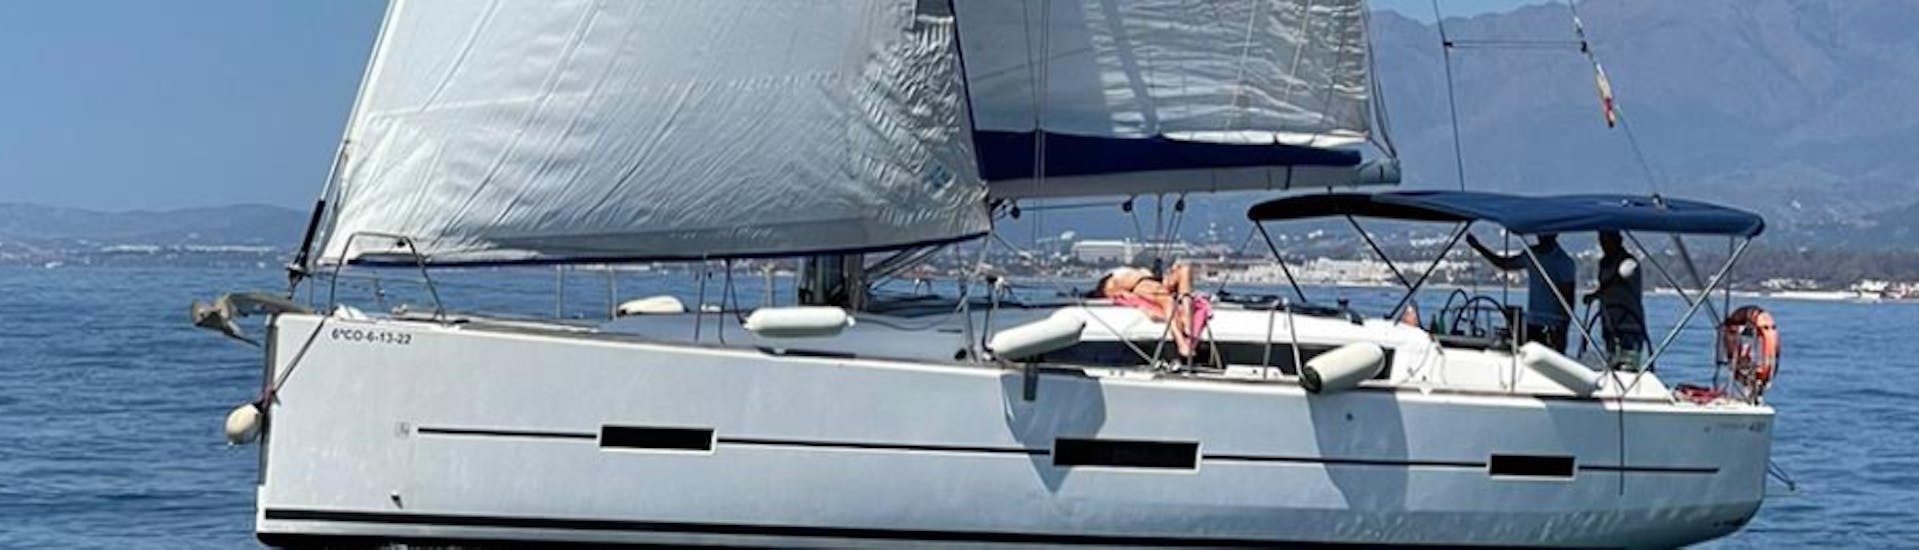 Our boat during a Sailboat Rental in Marbella (up to 12 people) with Royal Catamaran Marbella.